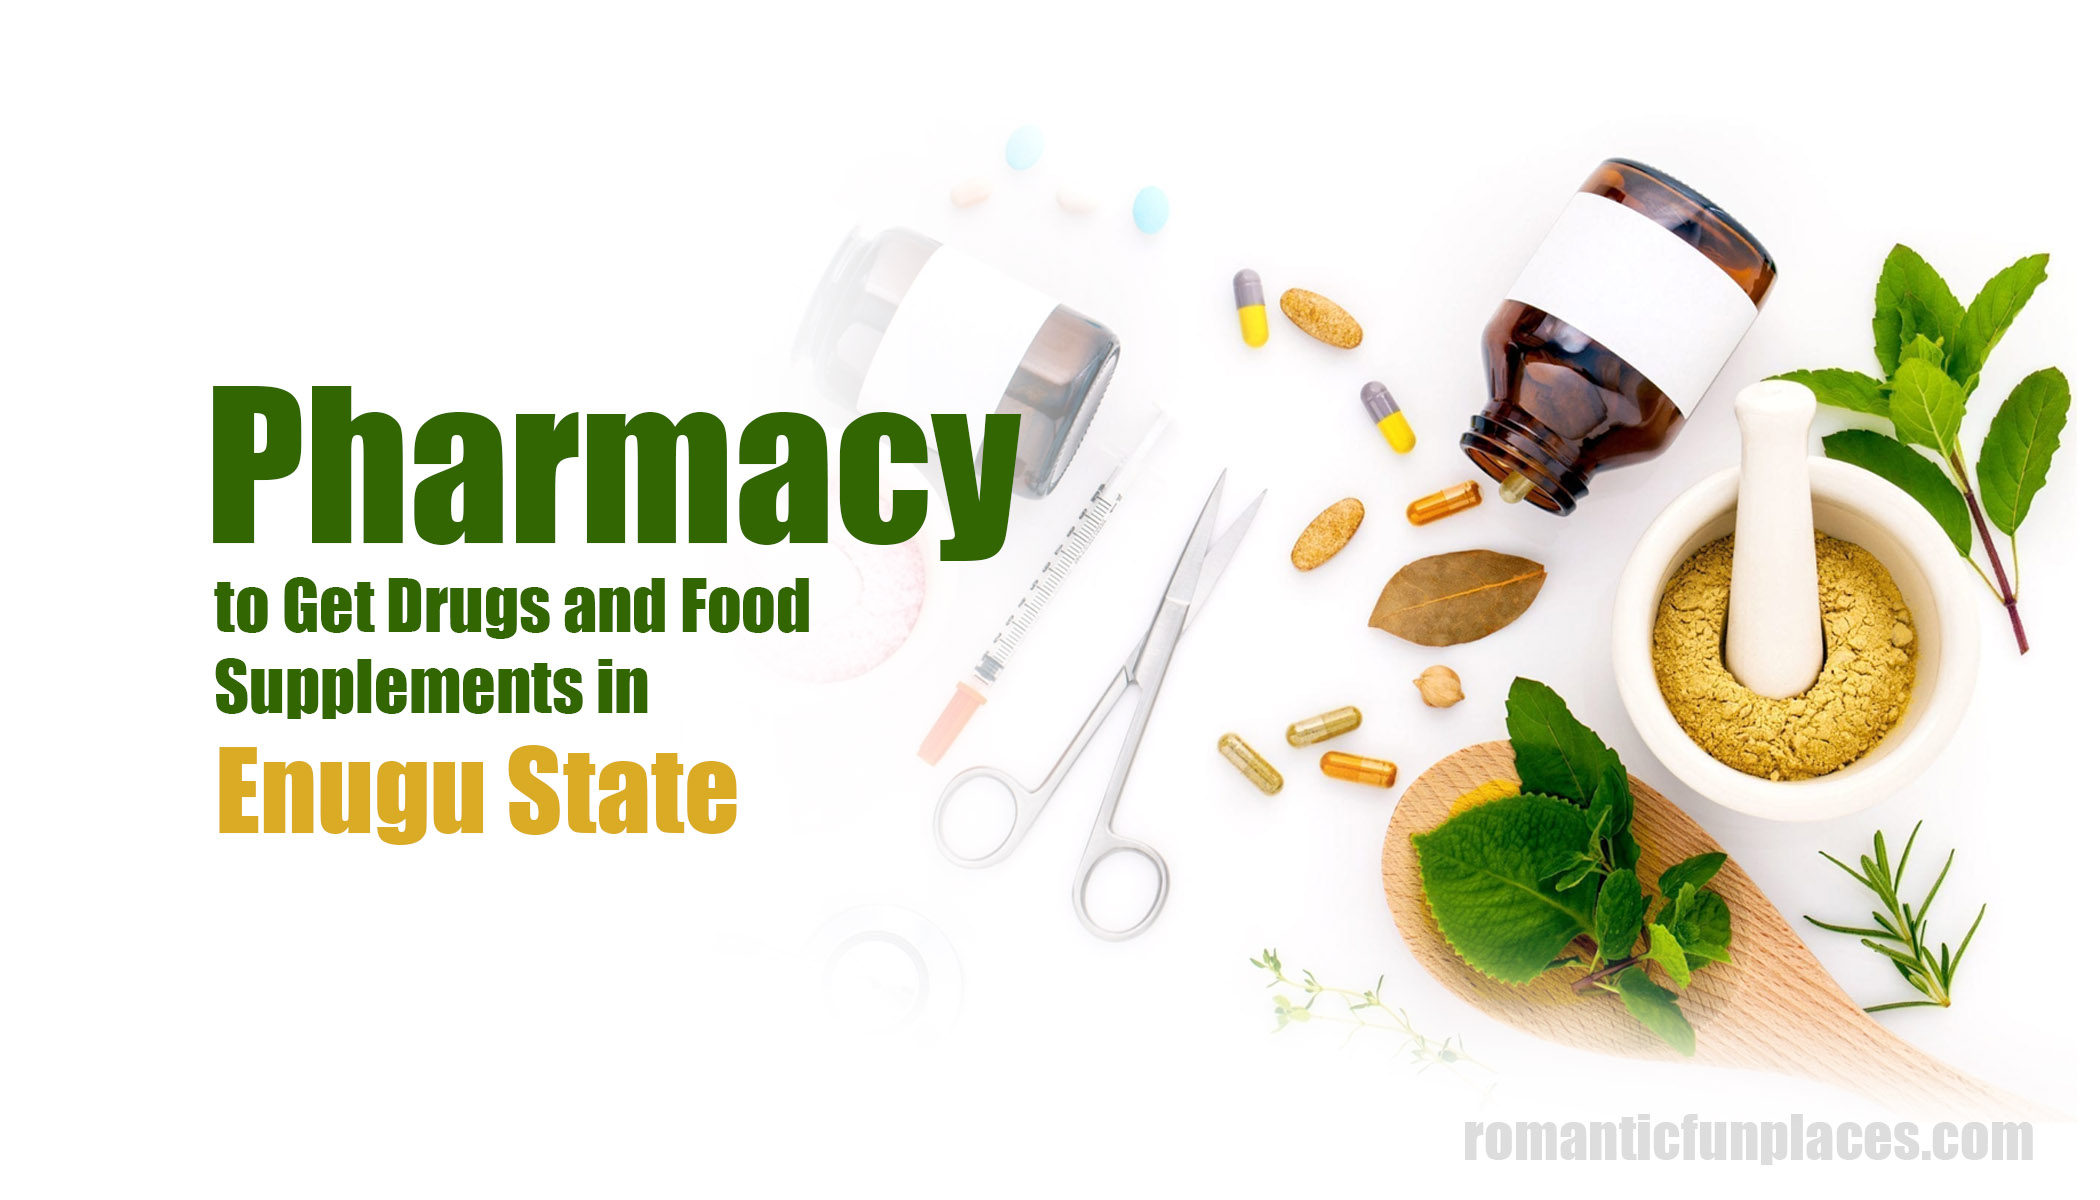 Pharmacy to Get Drugs and Food Supplements in Enugu State